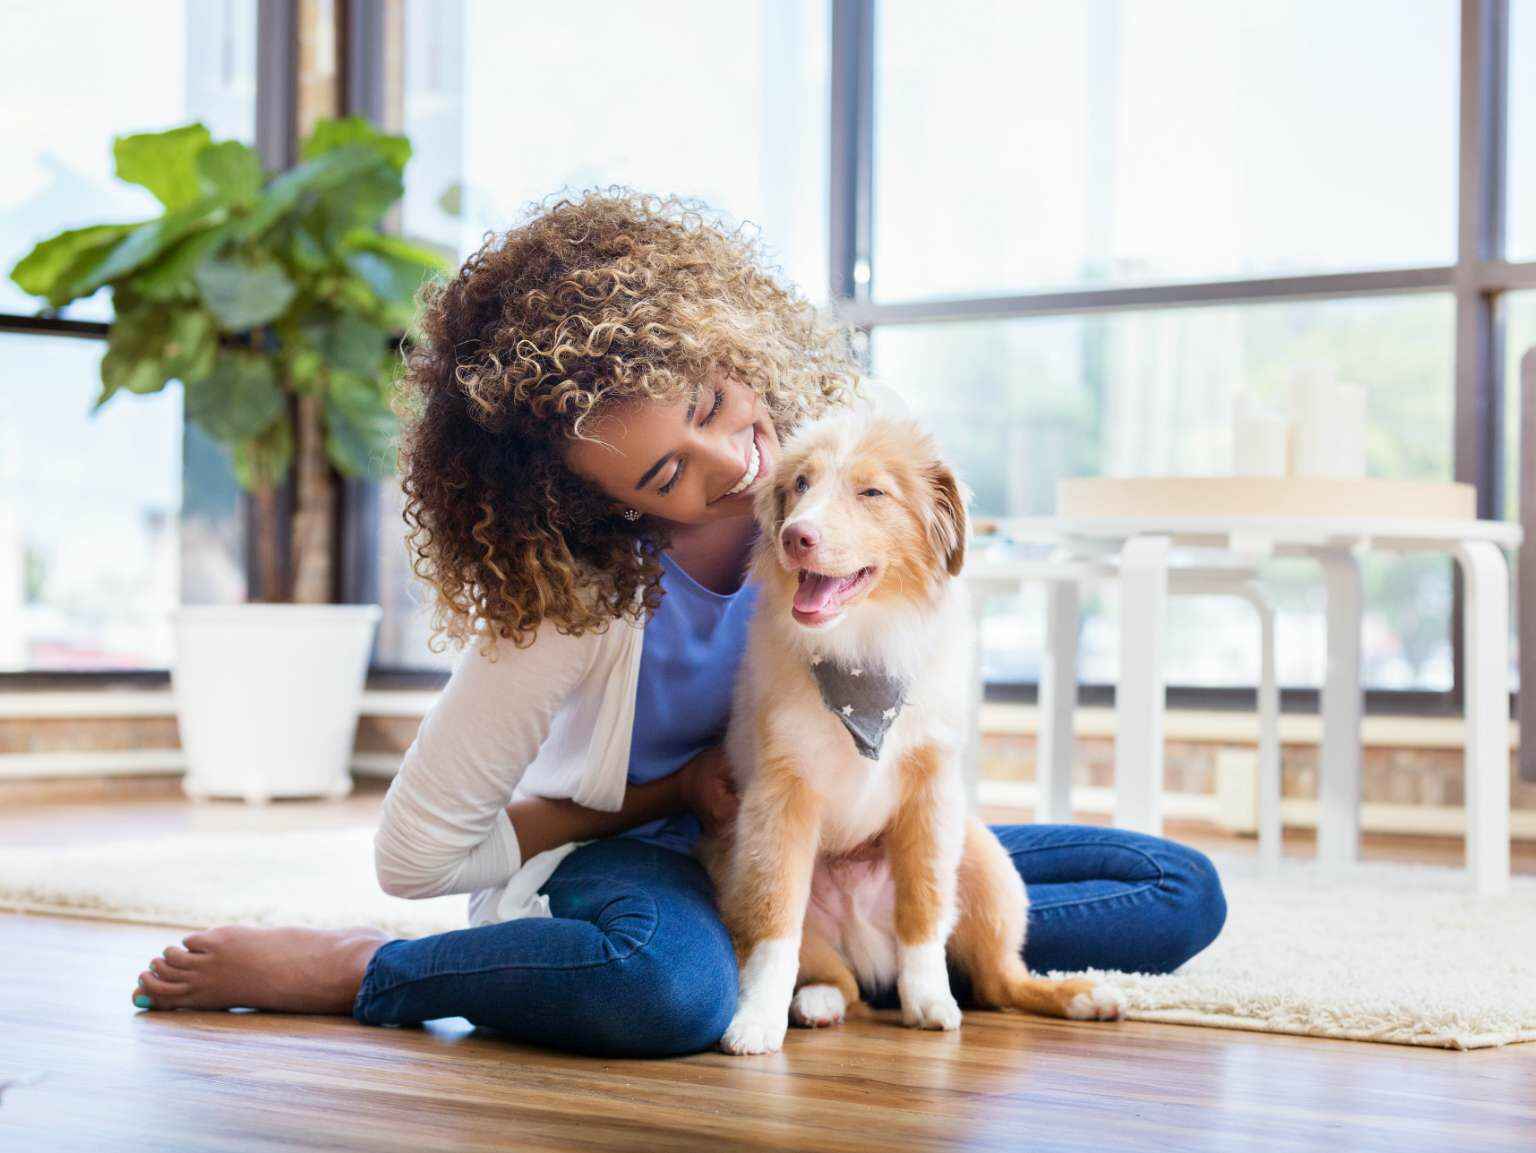 miling woman sits on floor with fluffy puppy